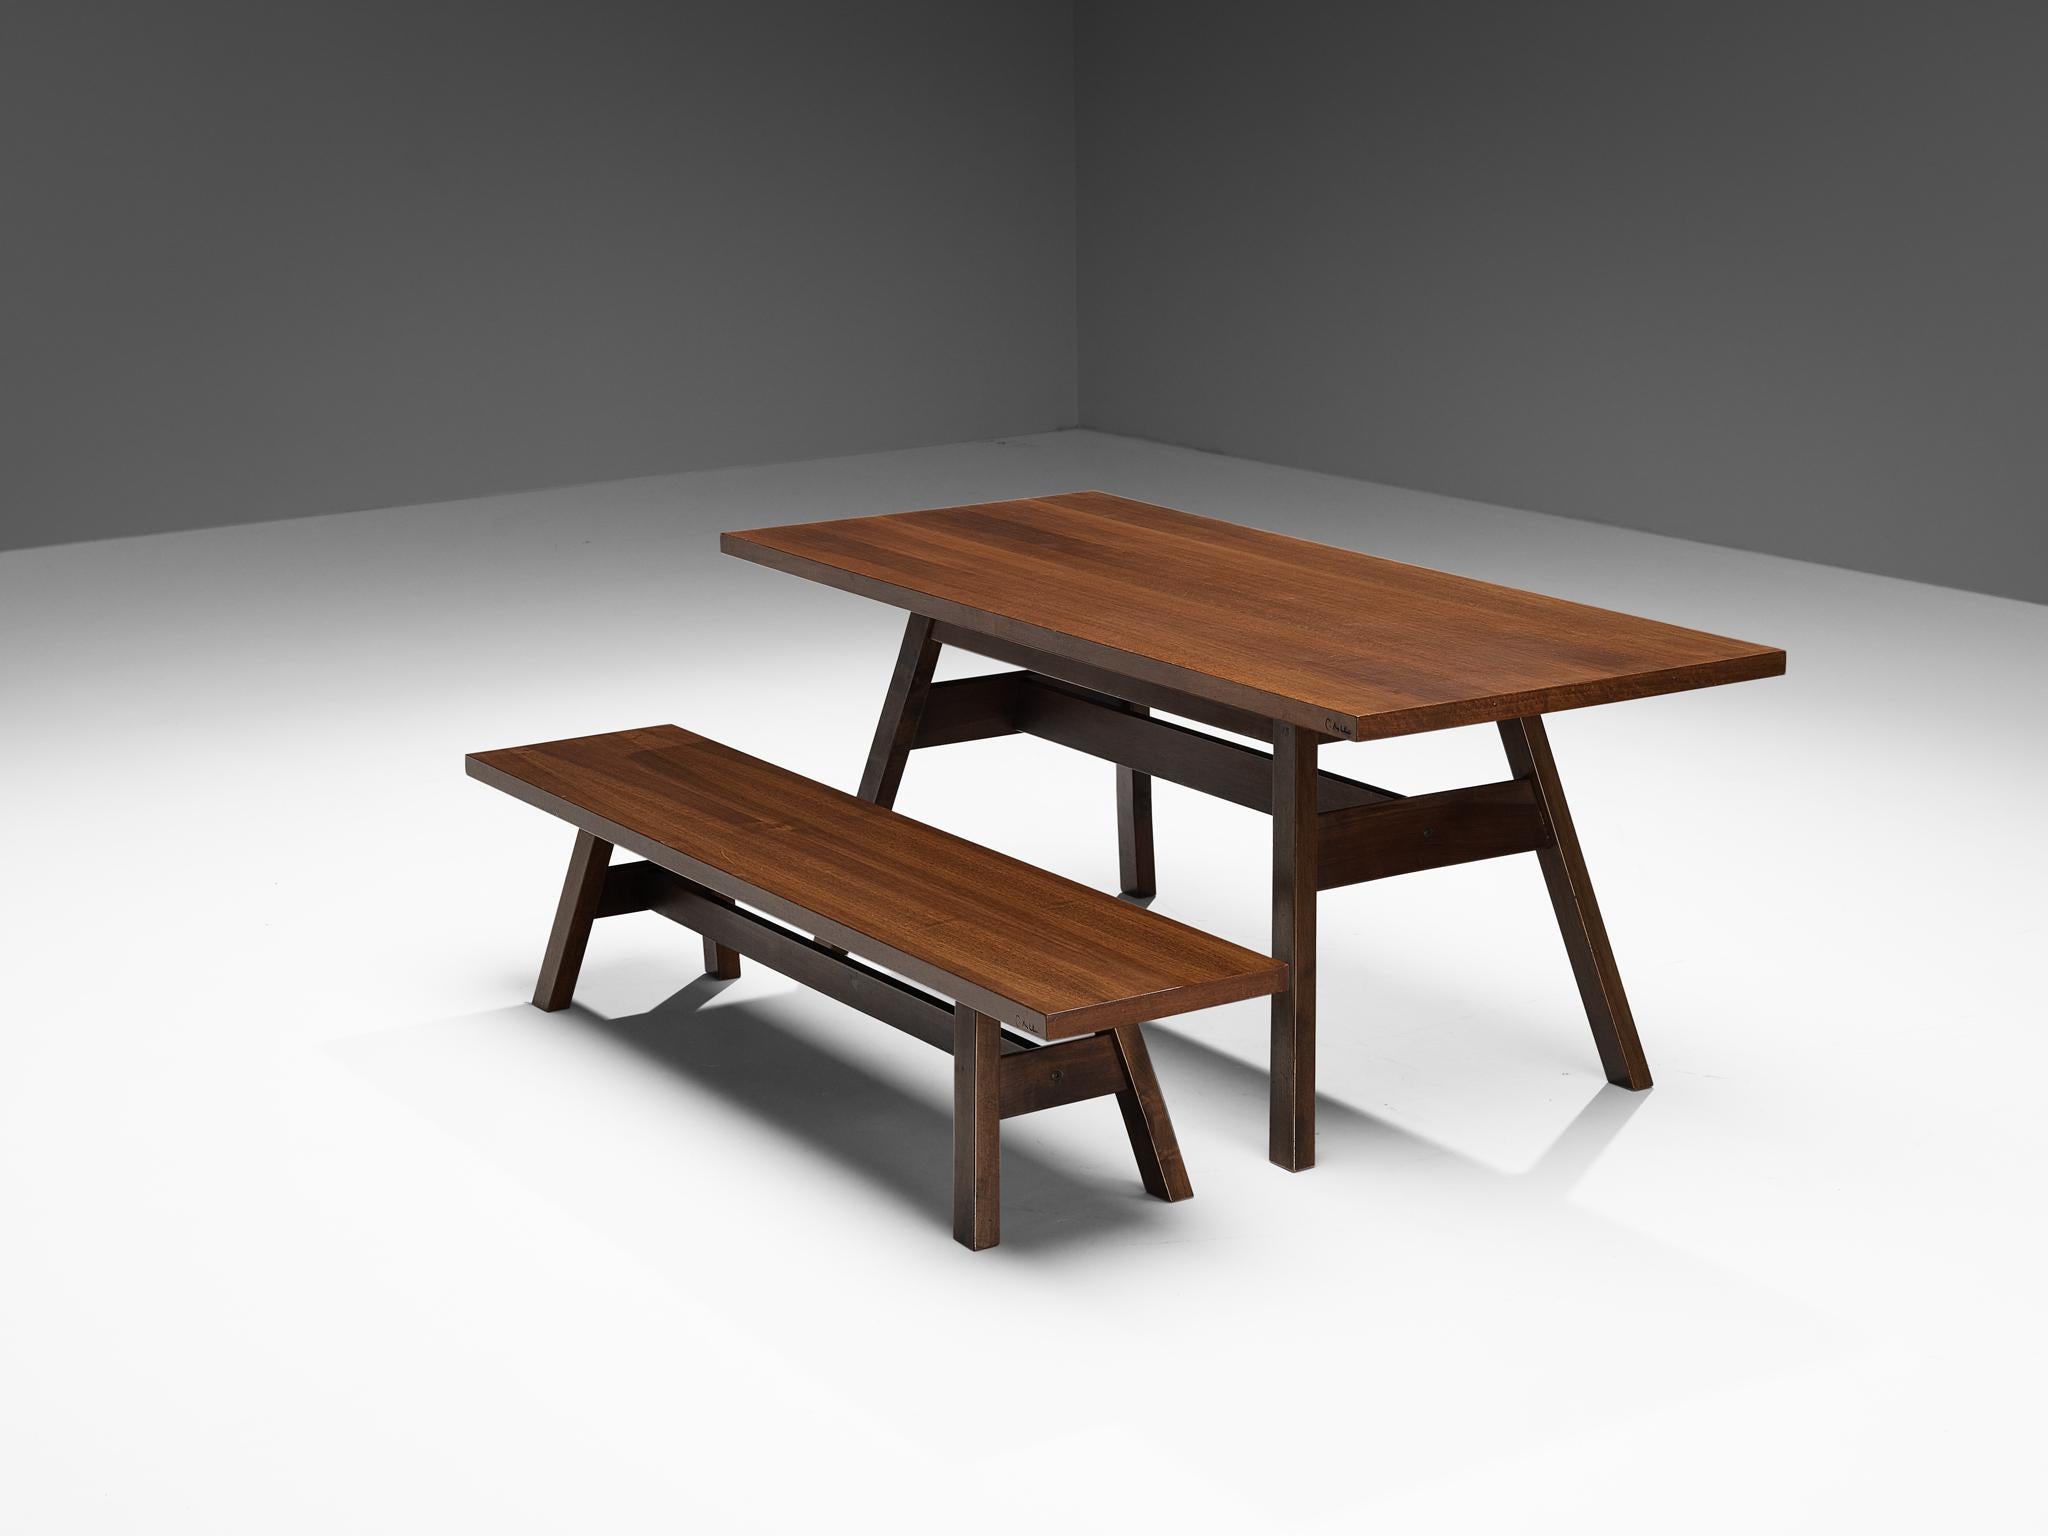  Giovanni Michelucci for Poltronova, ´Torbecchia', table and bench, walnut, Italy, design 1964

This dining room set consisting of a beautiful table and bench in walnut wood is designed by Giovanni Michelucci. This set, with its solid and grand